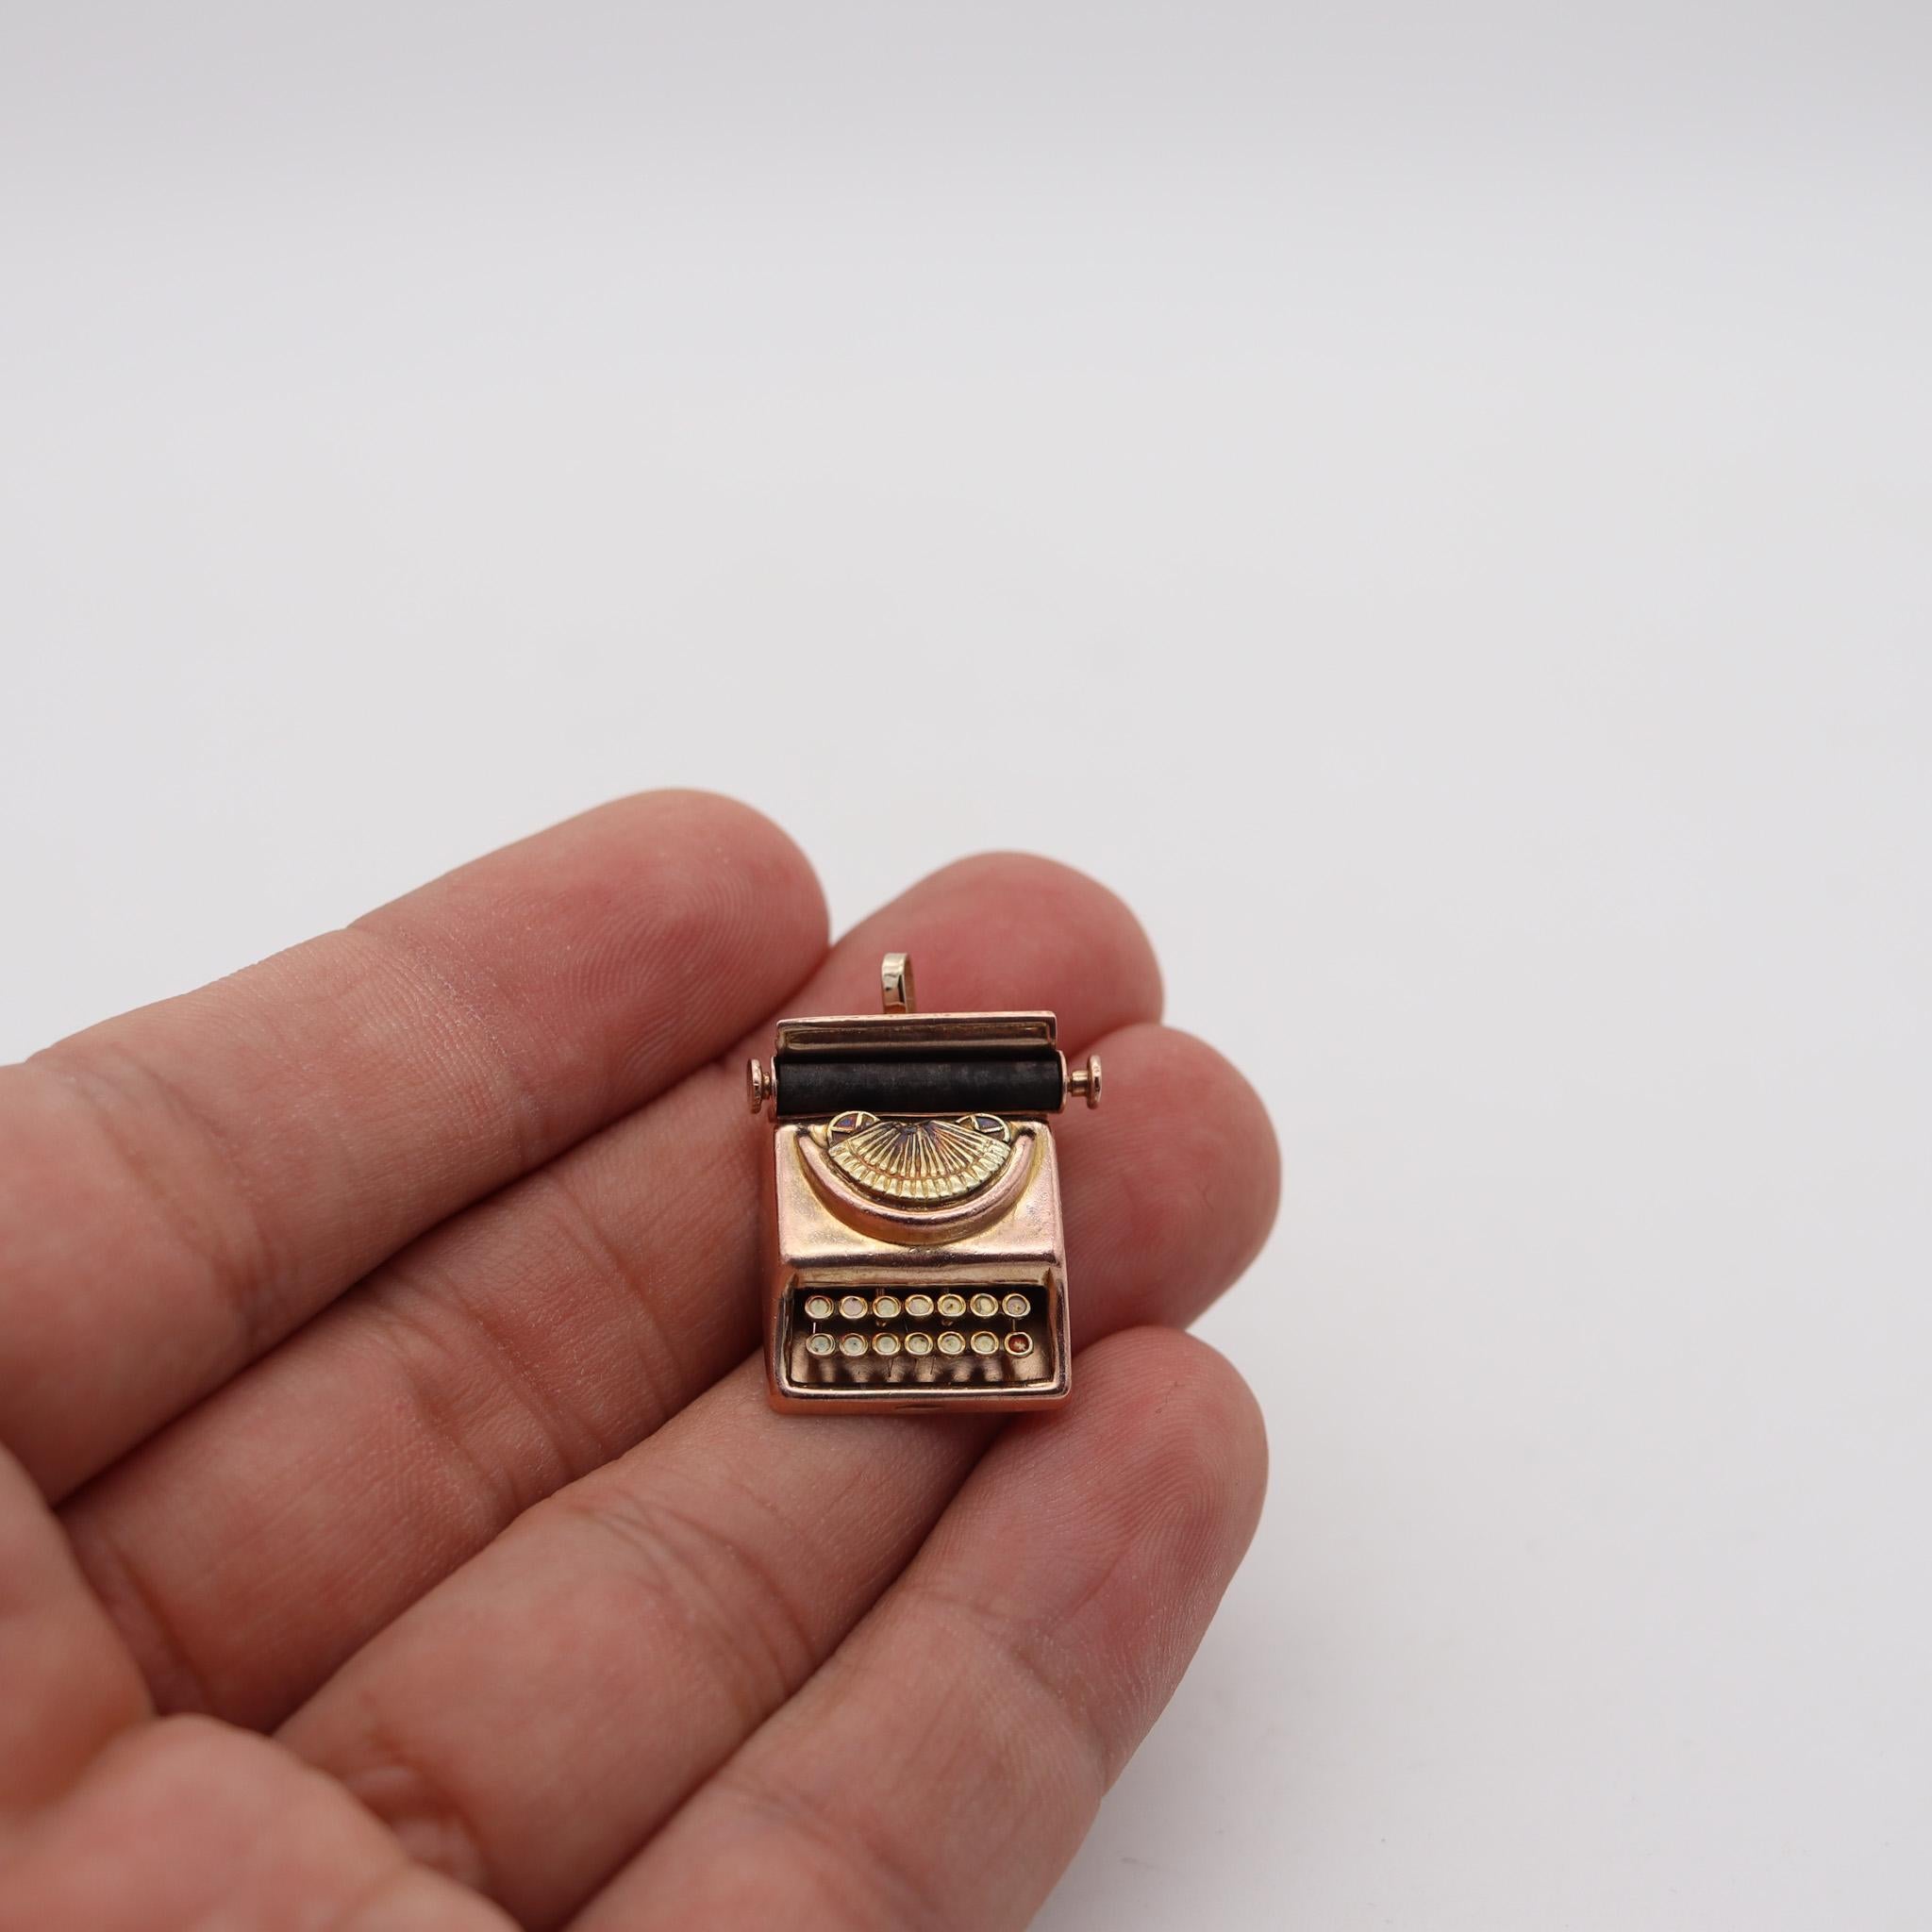 Art Deco 1930 Typewriting Machine Pendant And Charm In Solid 14Kt Yellow Gold For Sale 3